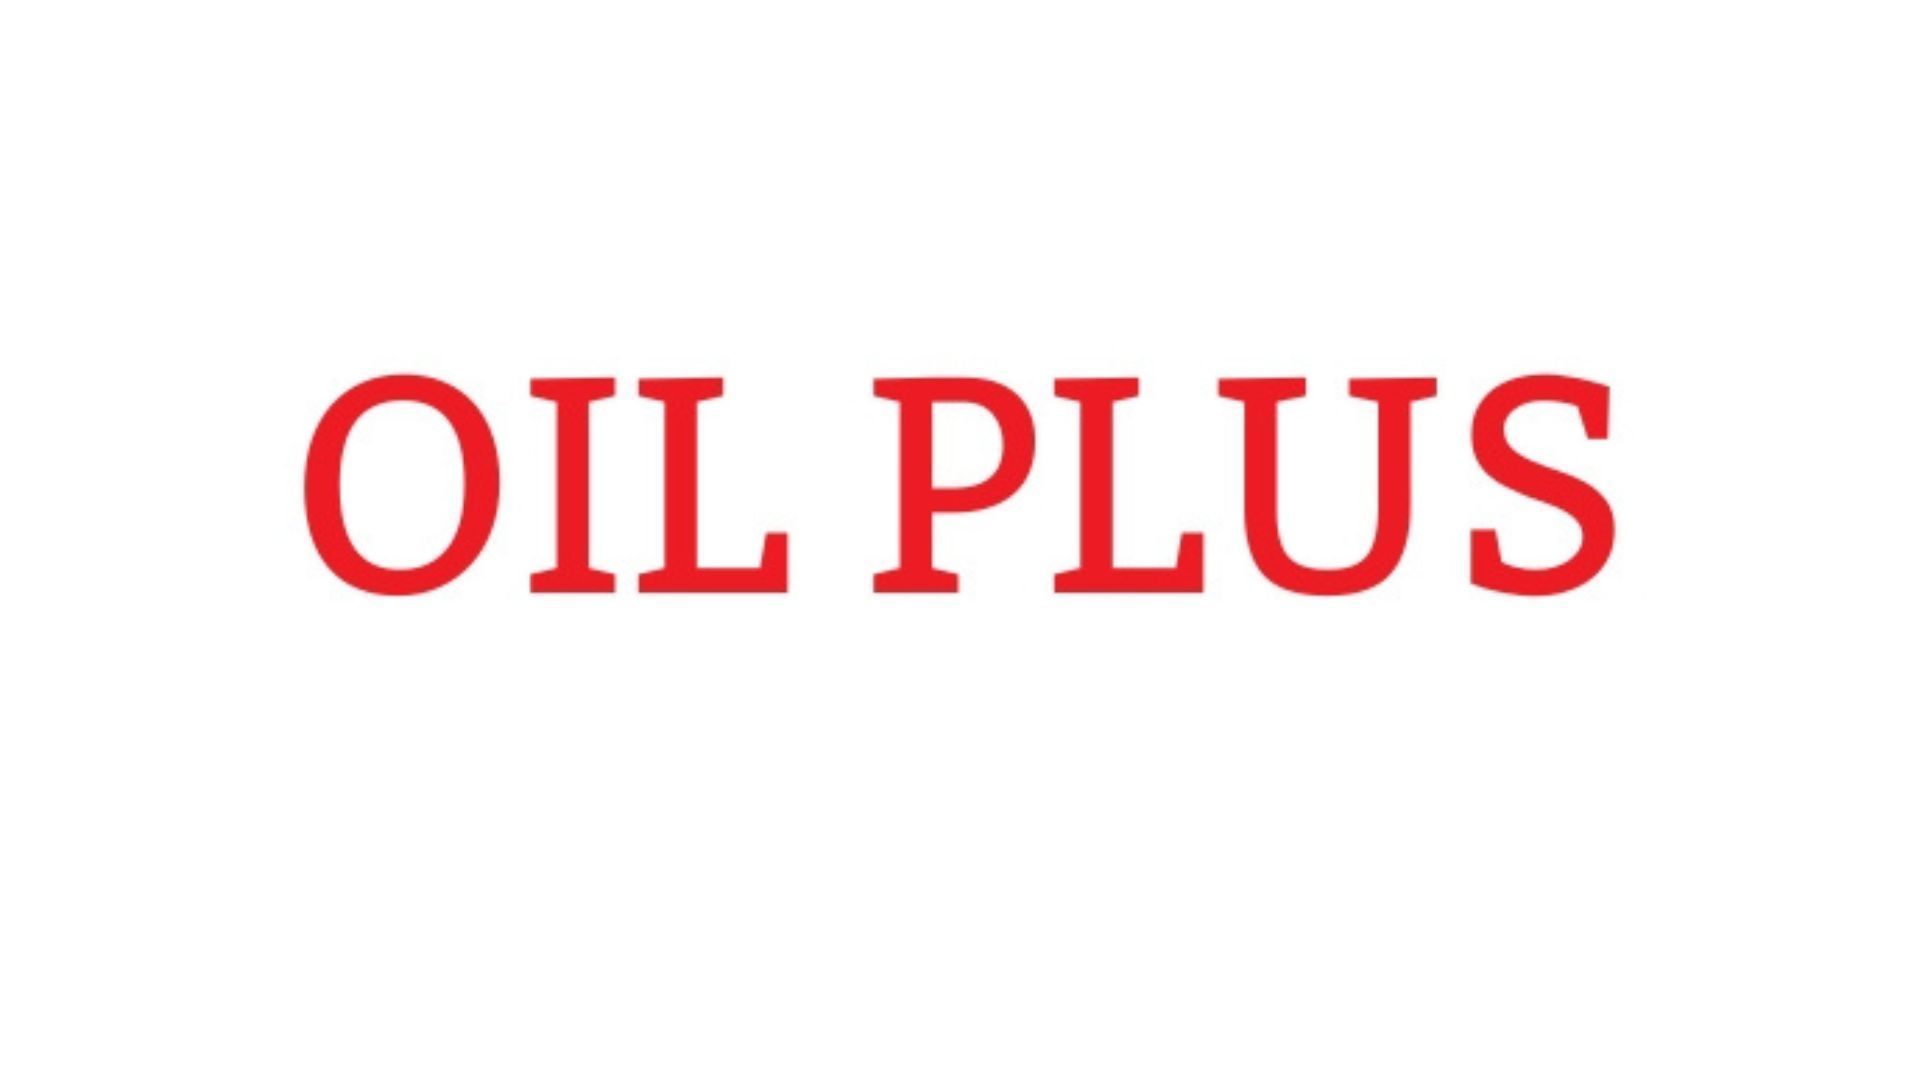 The logo for oil plus is red on a white background.